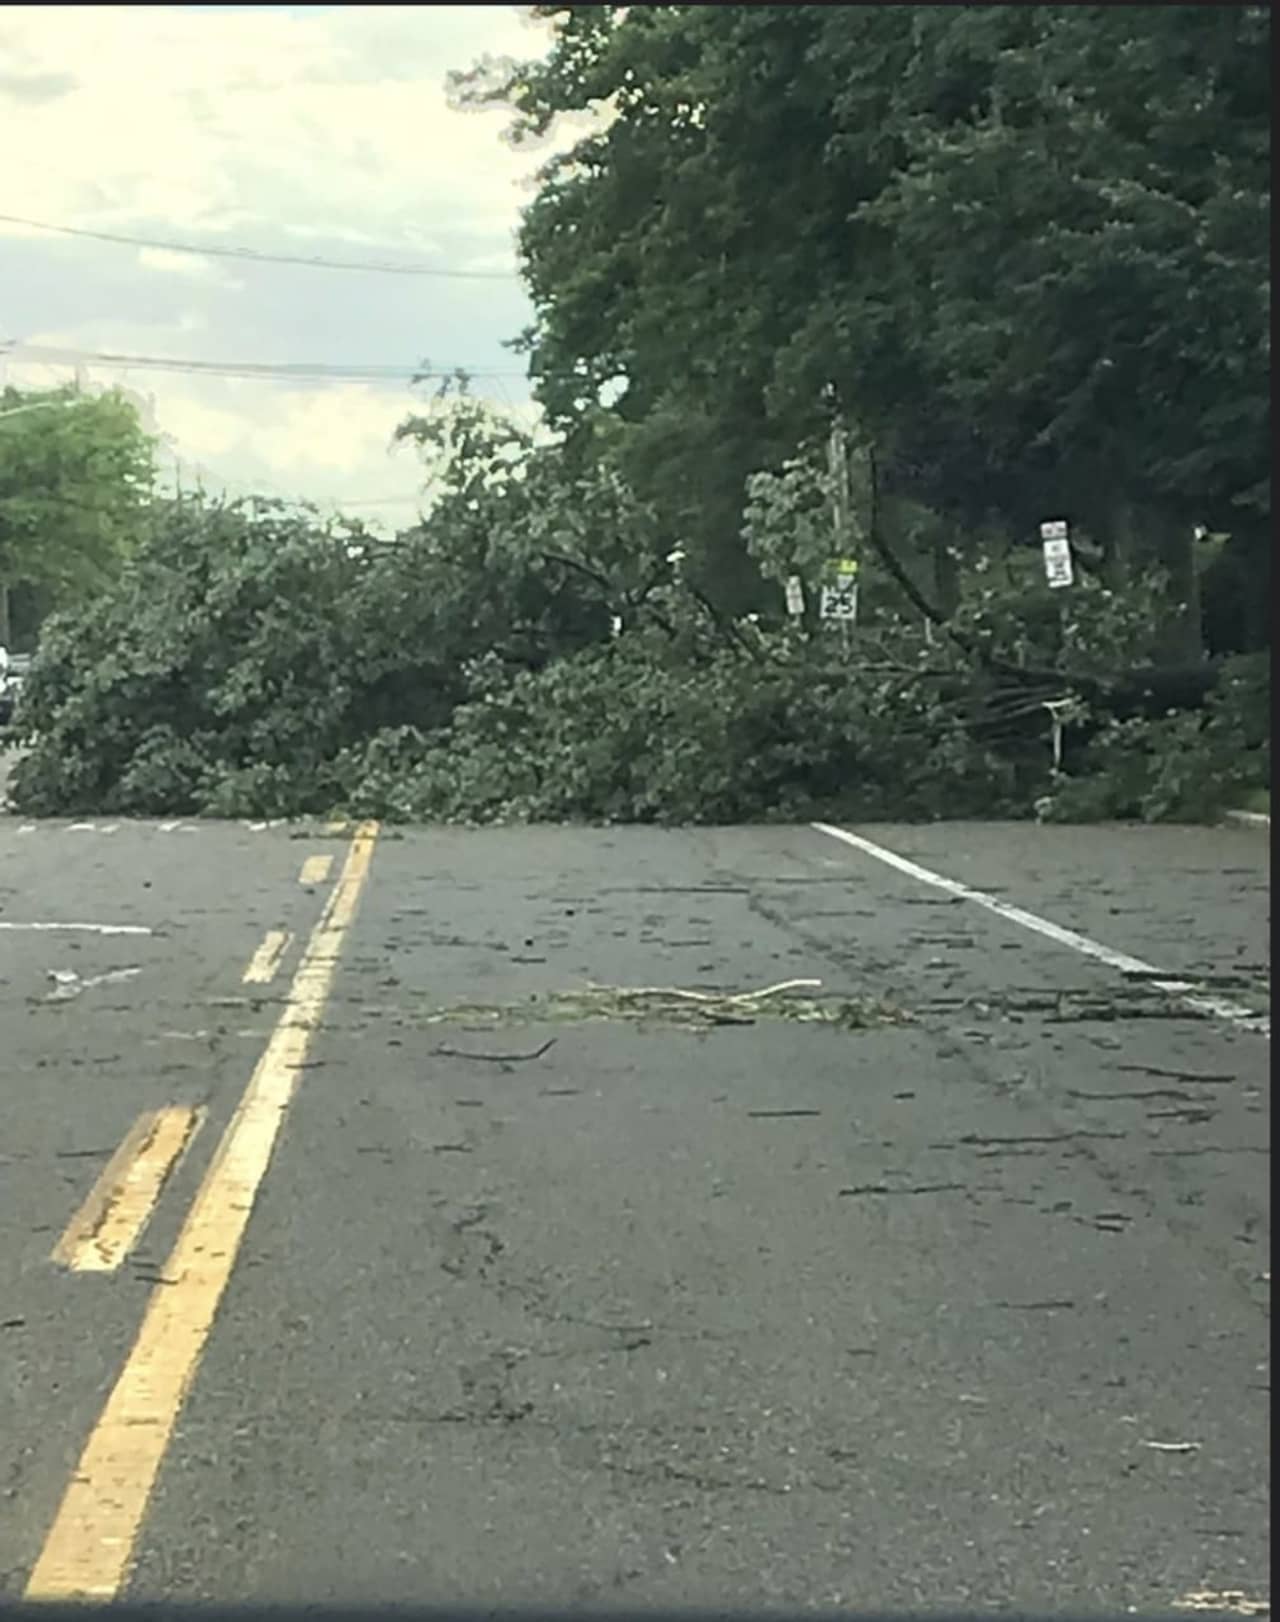 Roadways remain blocked due to numerous trees down.